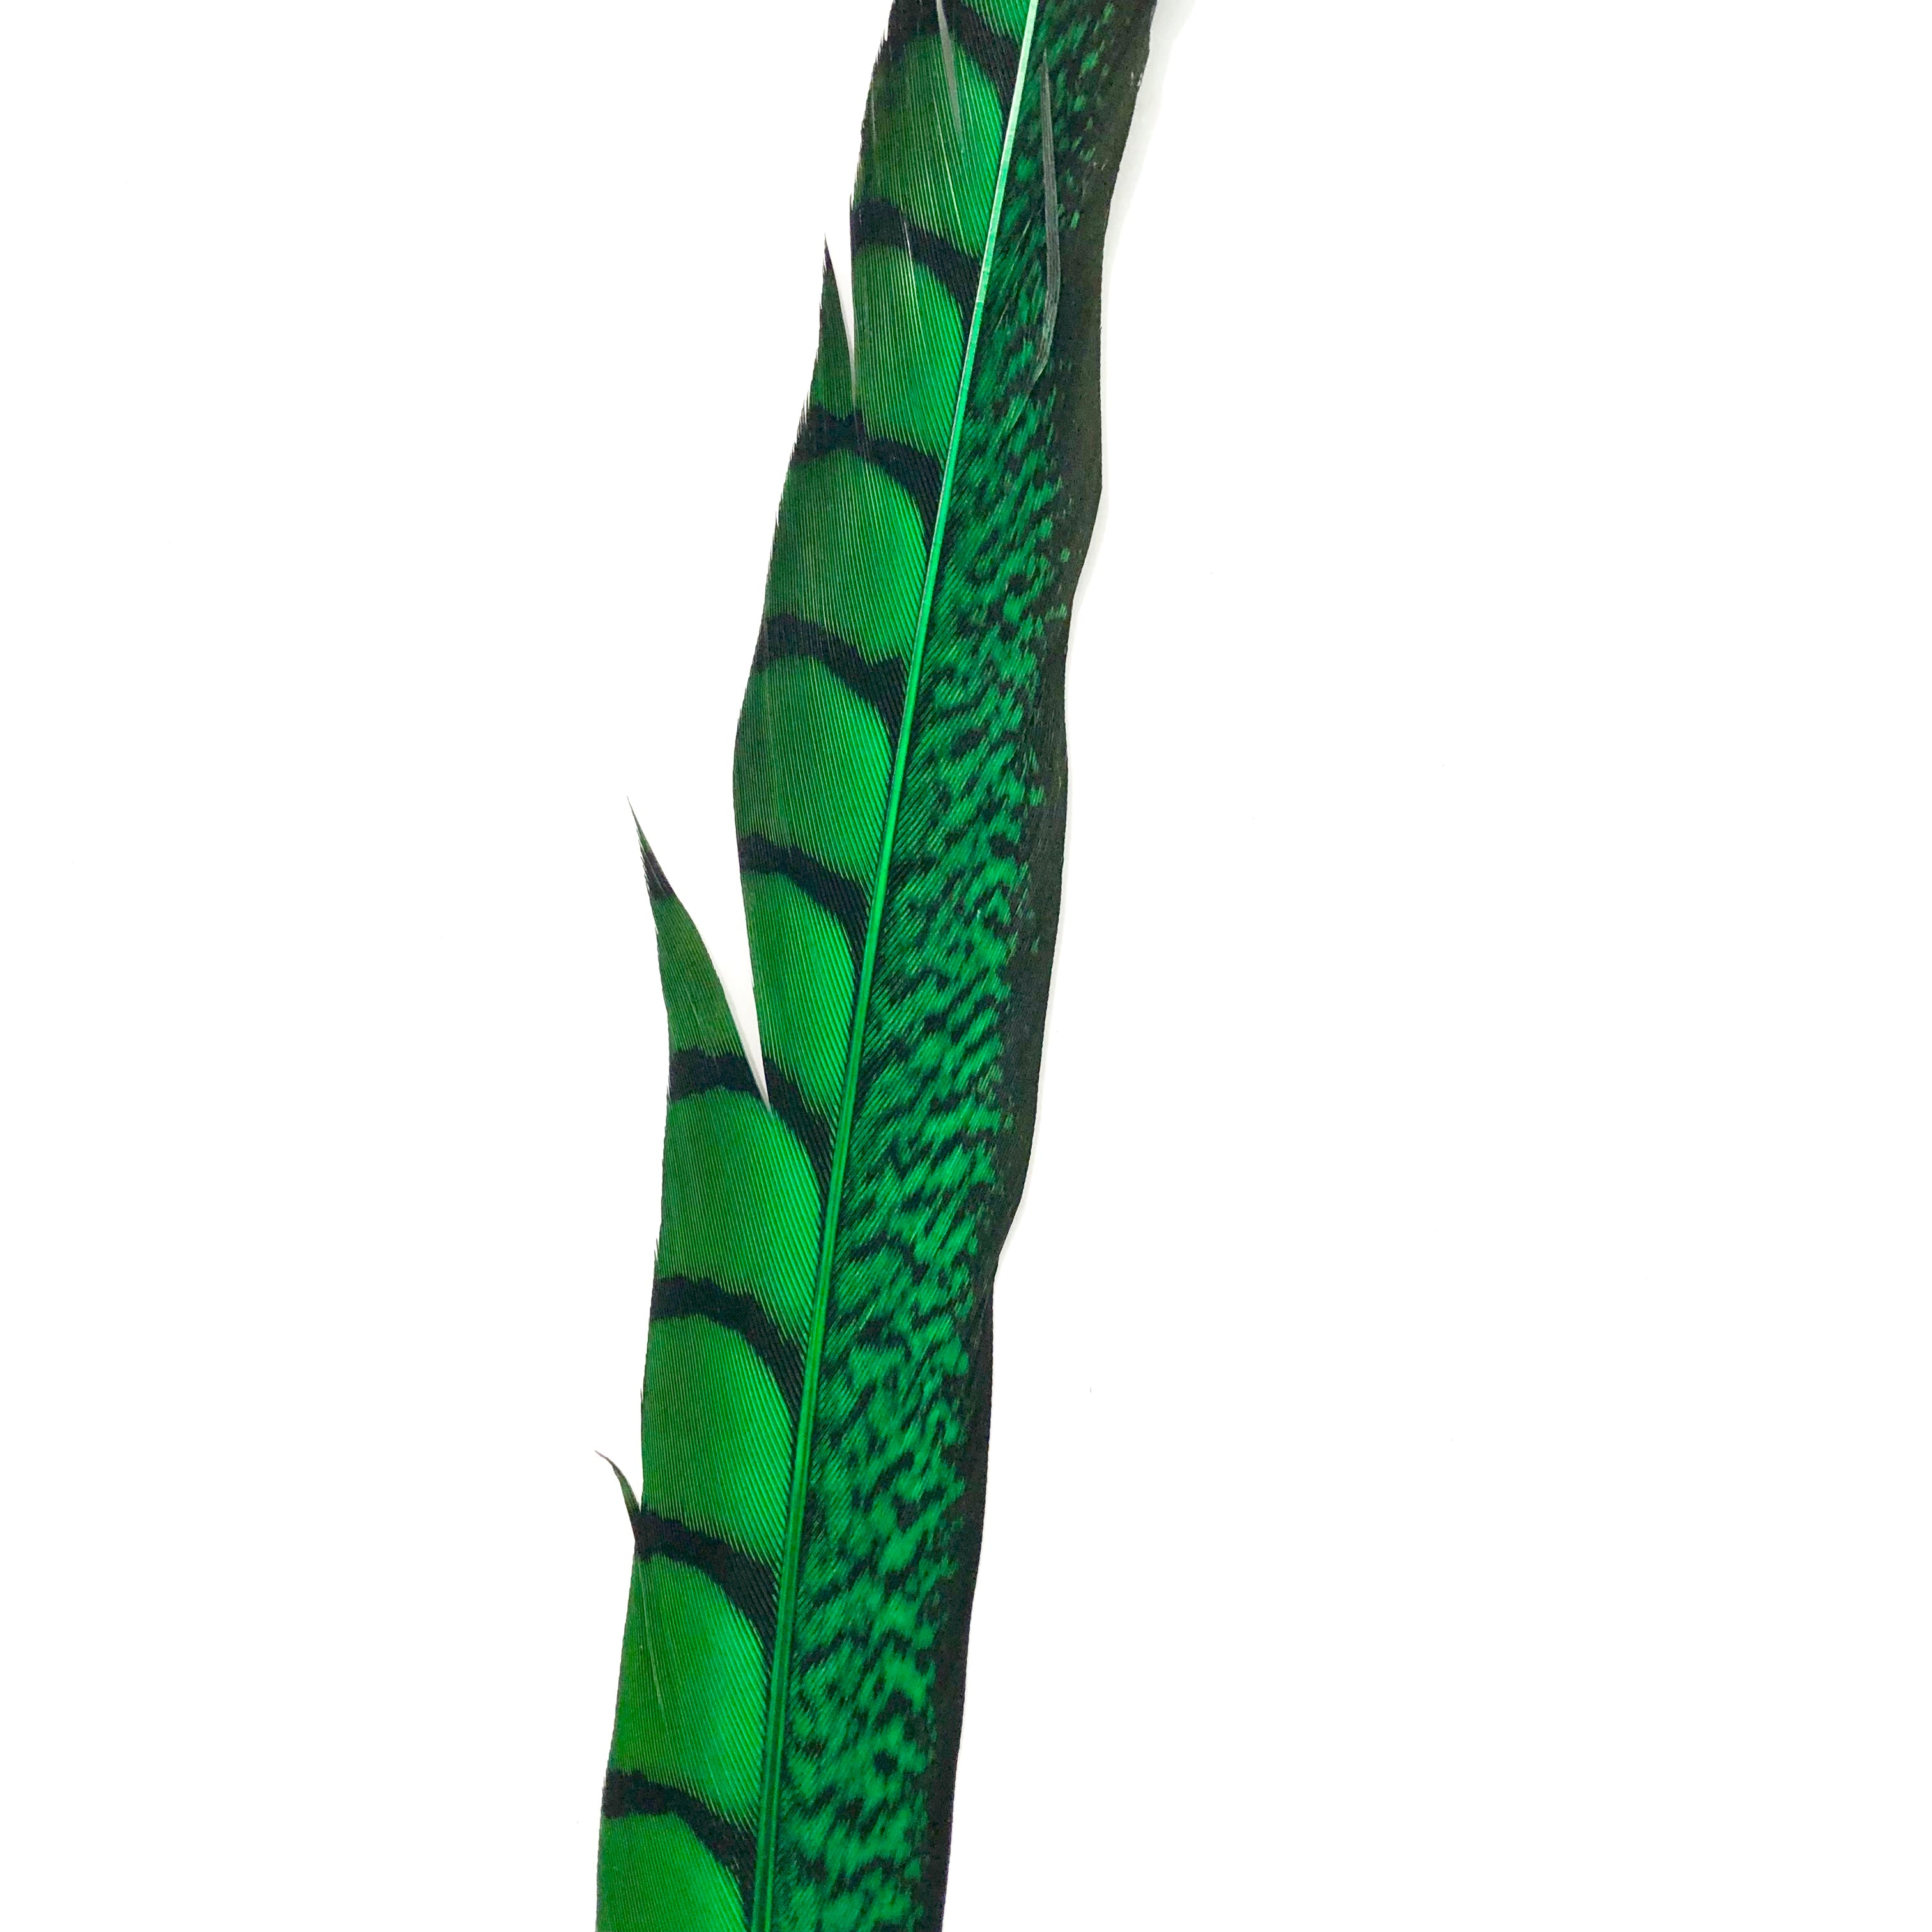 10" to 20" Lady Amherst Pheasant Side Tail Feather - Green ((SECONDS))